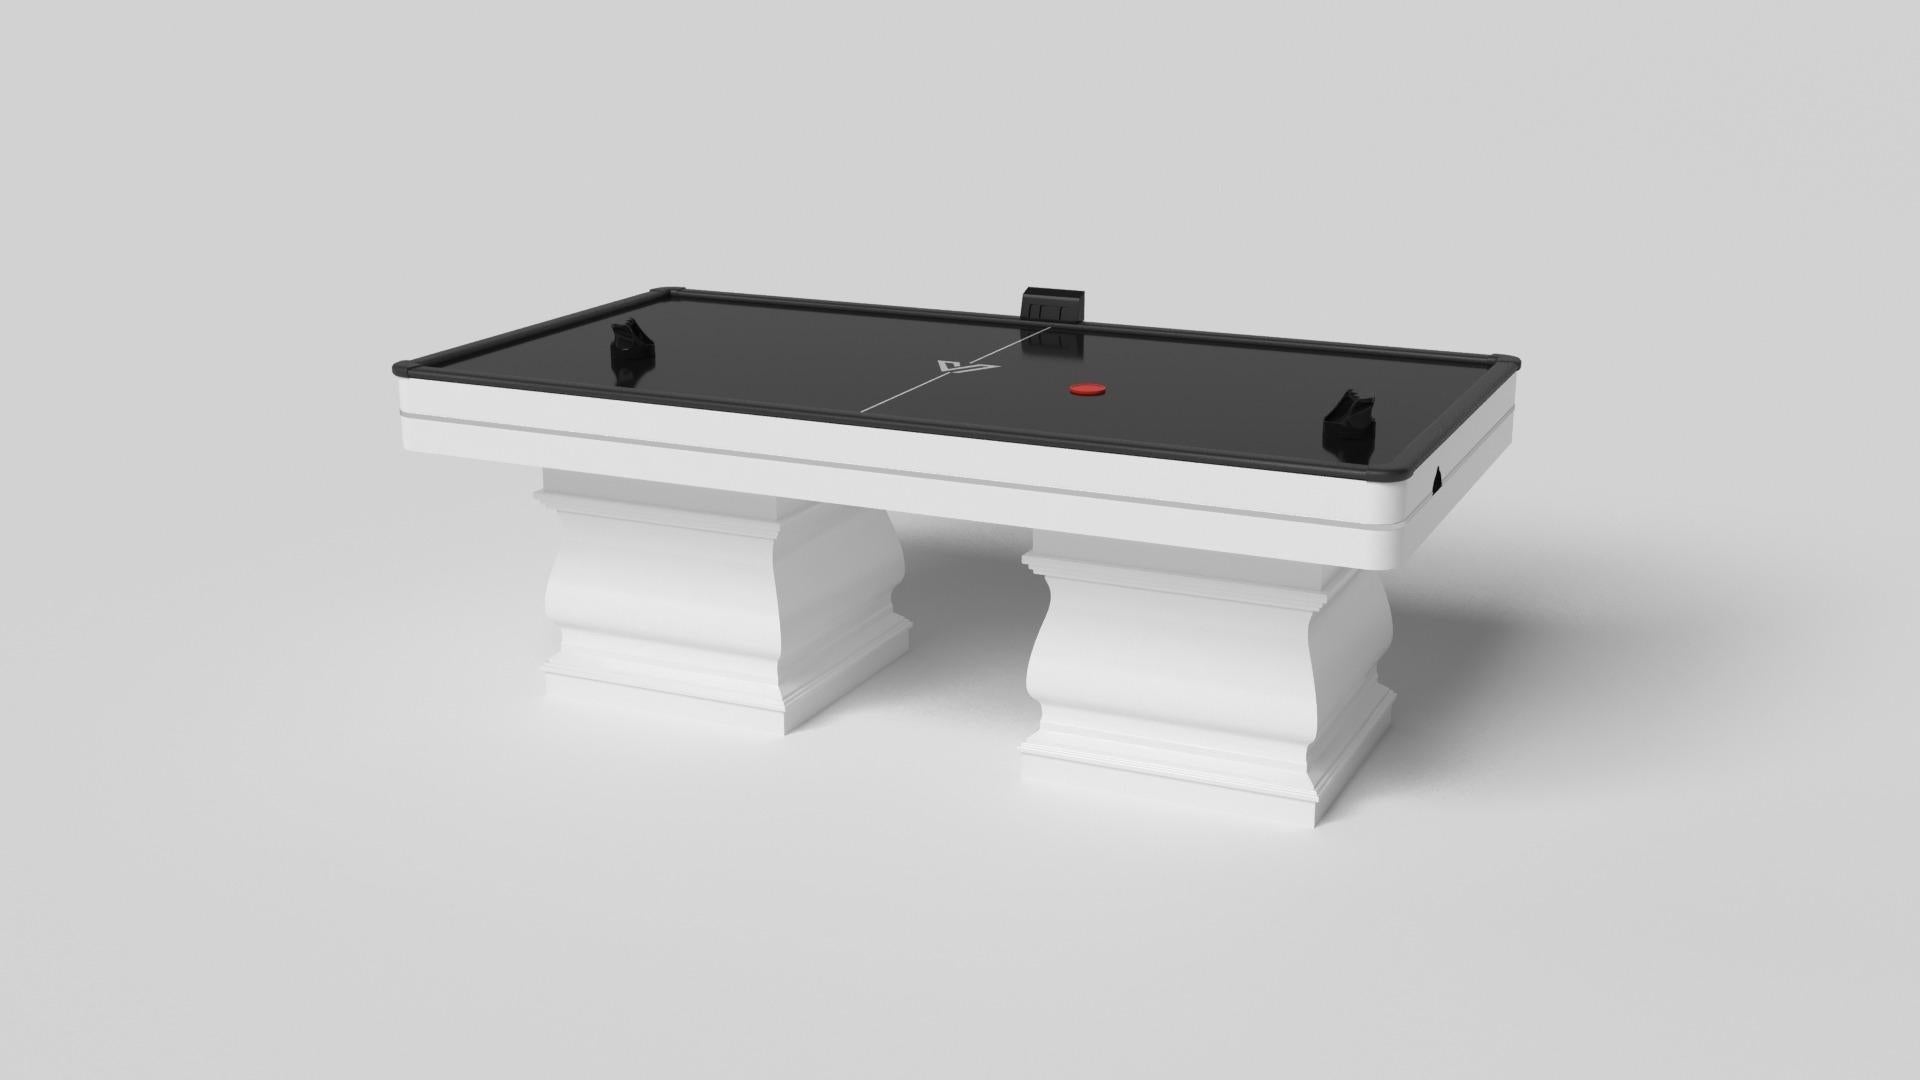 Two hand-sculpted legs bestow a sense of classic style upon this handcrafted air hockey table in white. This luxury wood game table features a smooth rectangular top perched upon two wide baluster column legs that mimic the curves and lines of crown